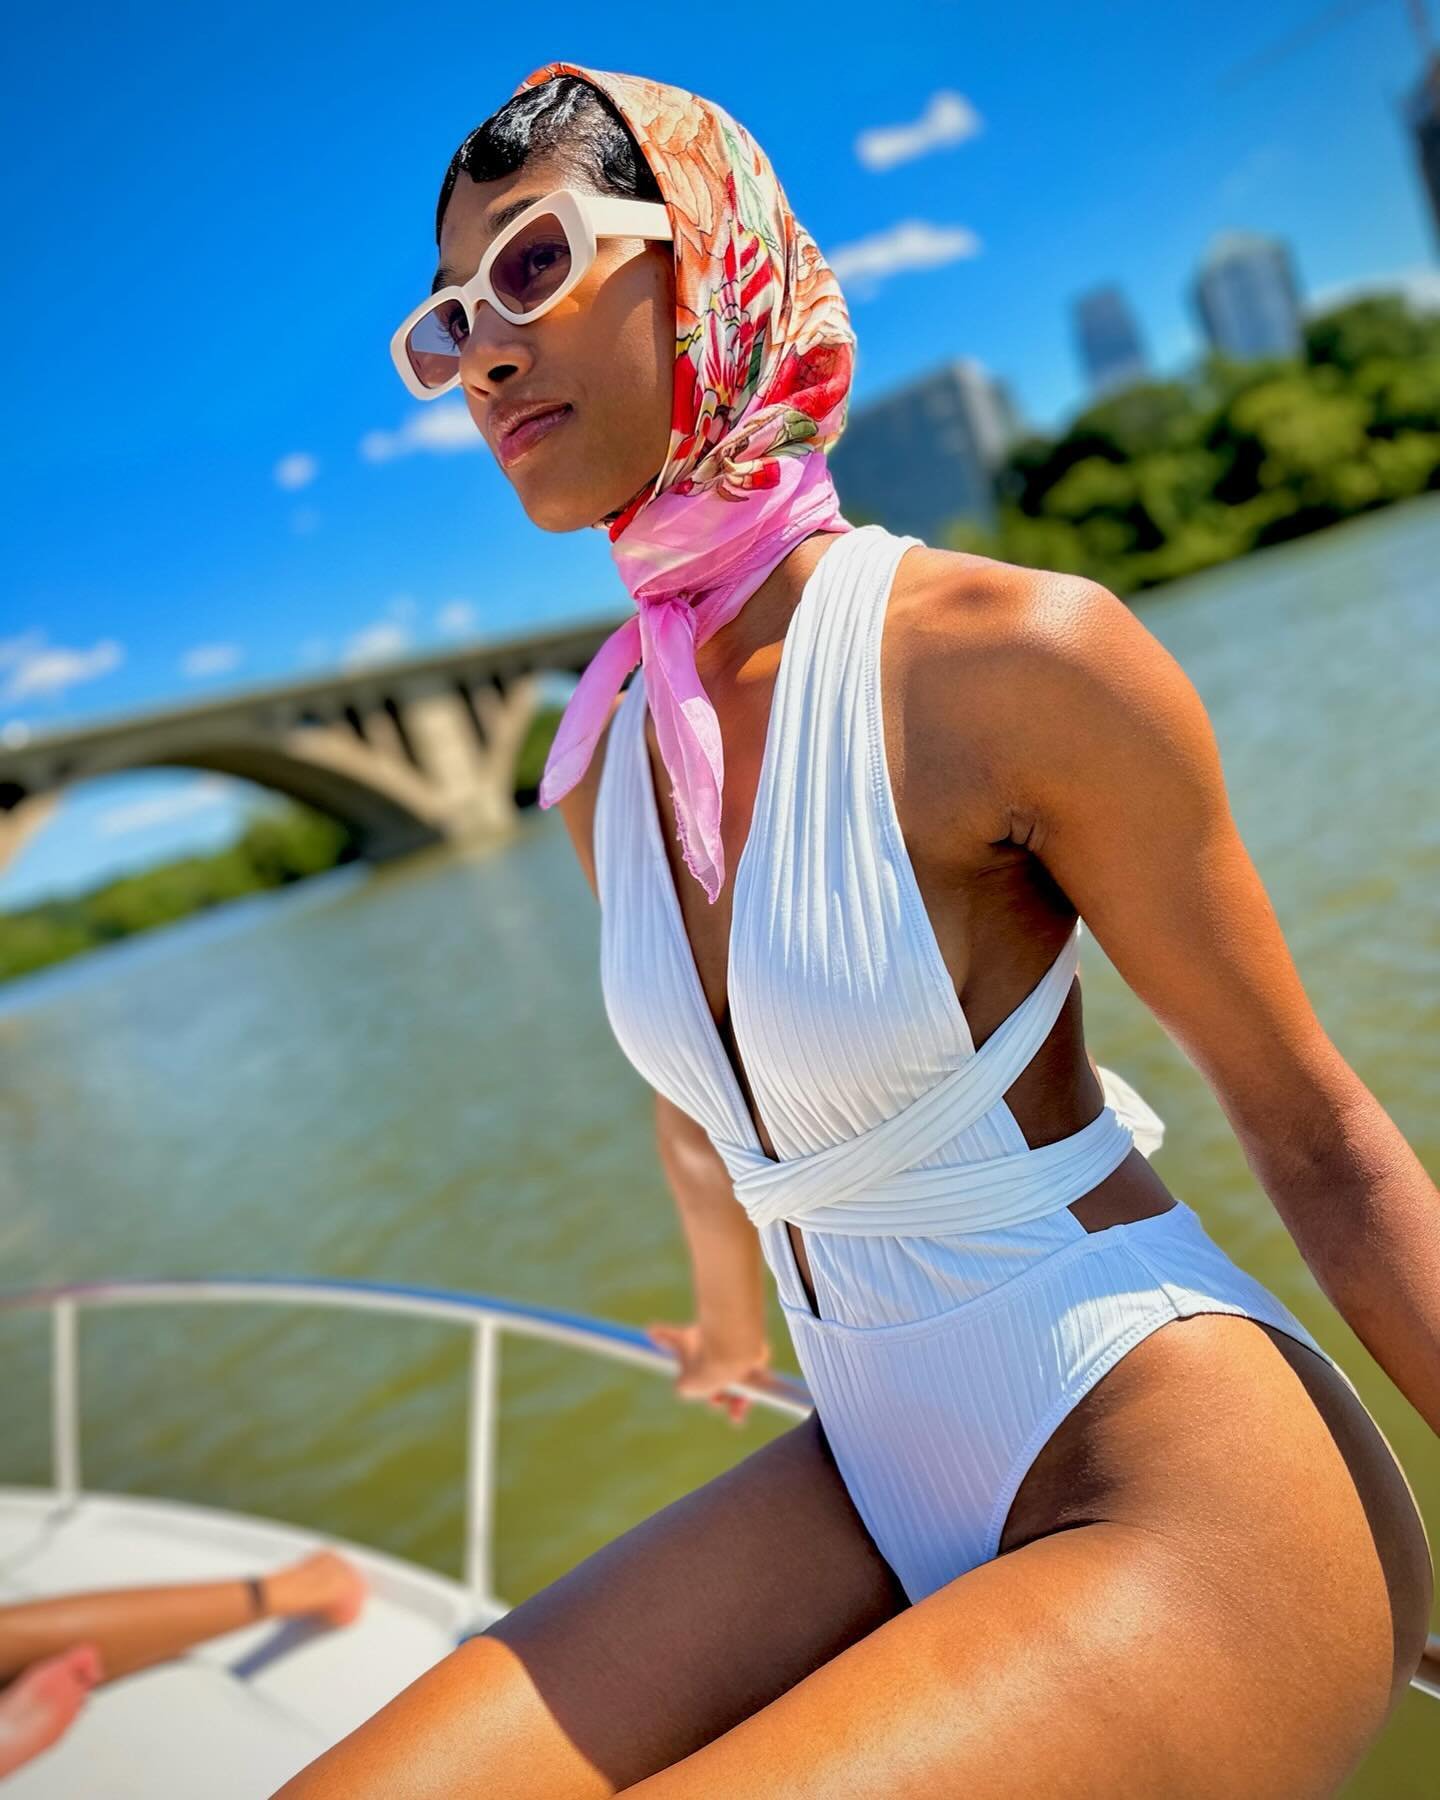 The weather is heating up and booking a charter with Mahogany Yacht Charters is the perfect way to cool down and enjoy the Nation&rsquo;s Capital from the Potomac River!⚓️

Whether you&rsquo;re planning a day with family and friends, or a special cel